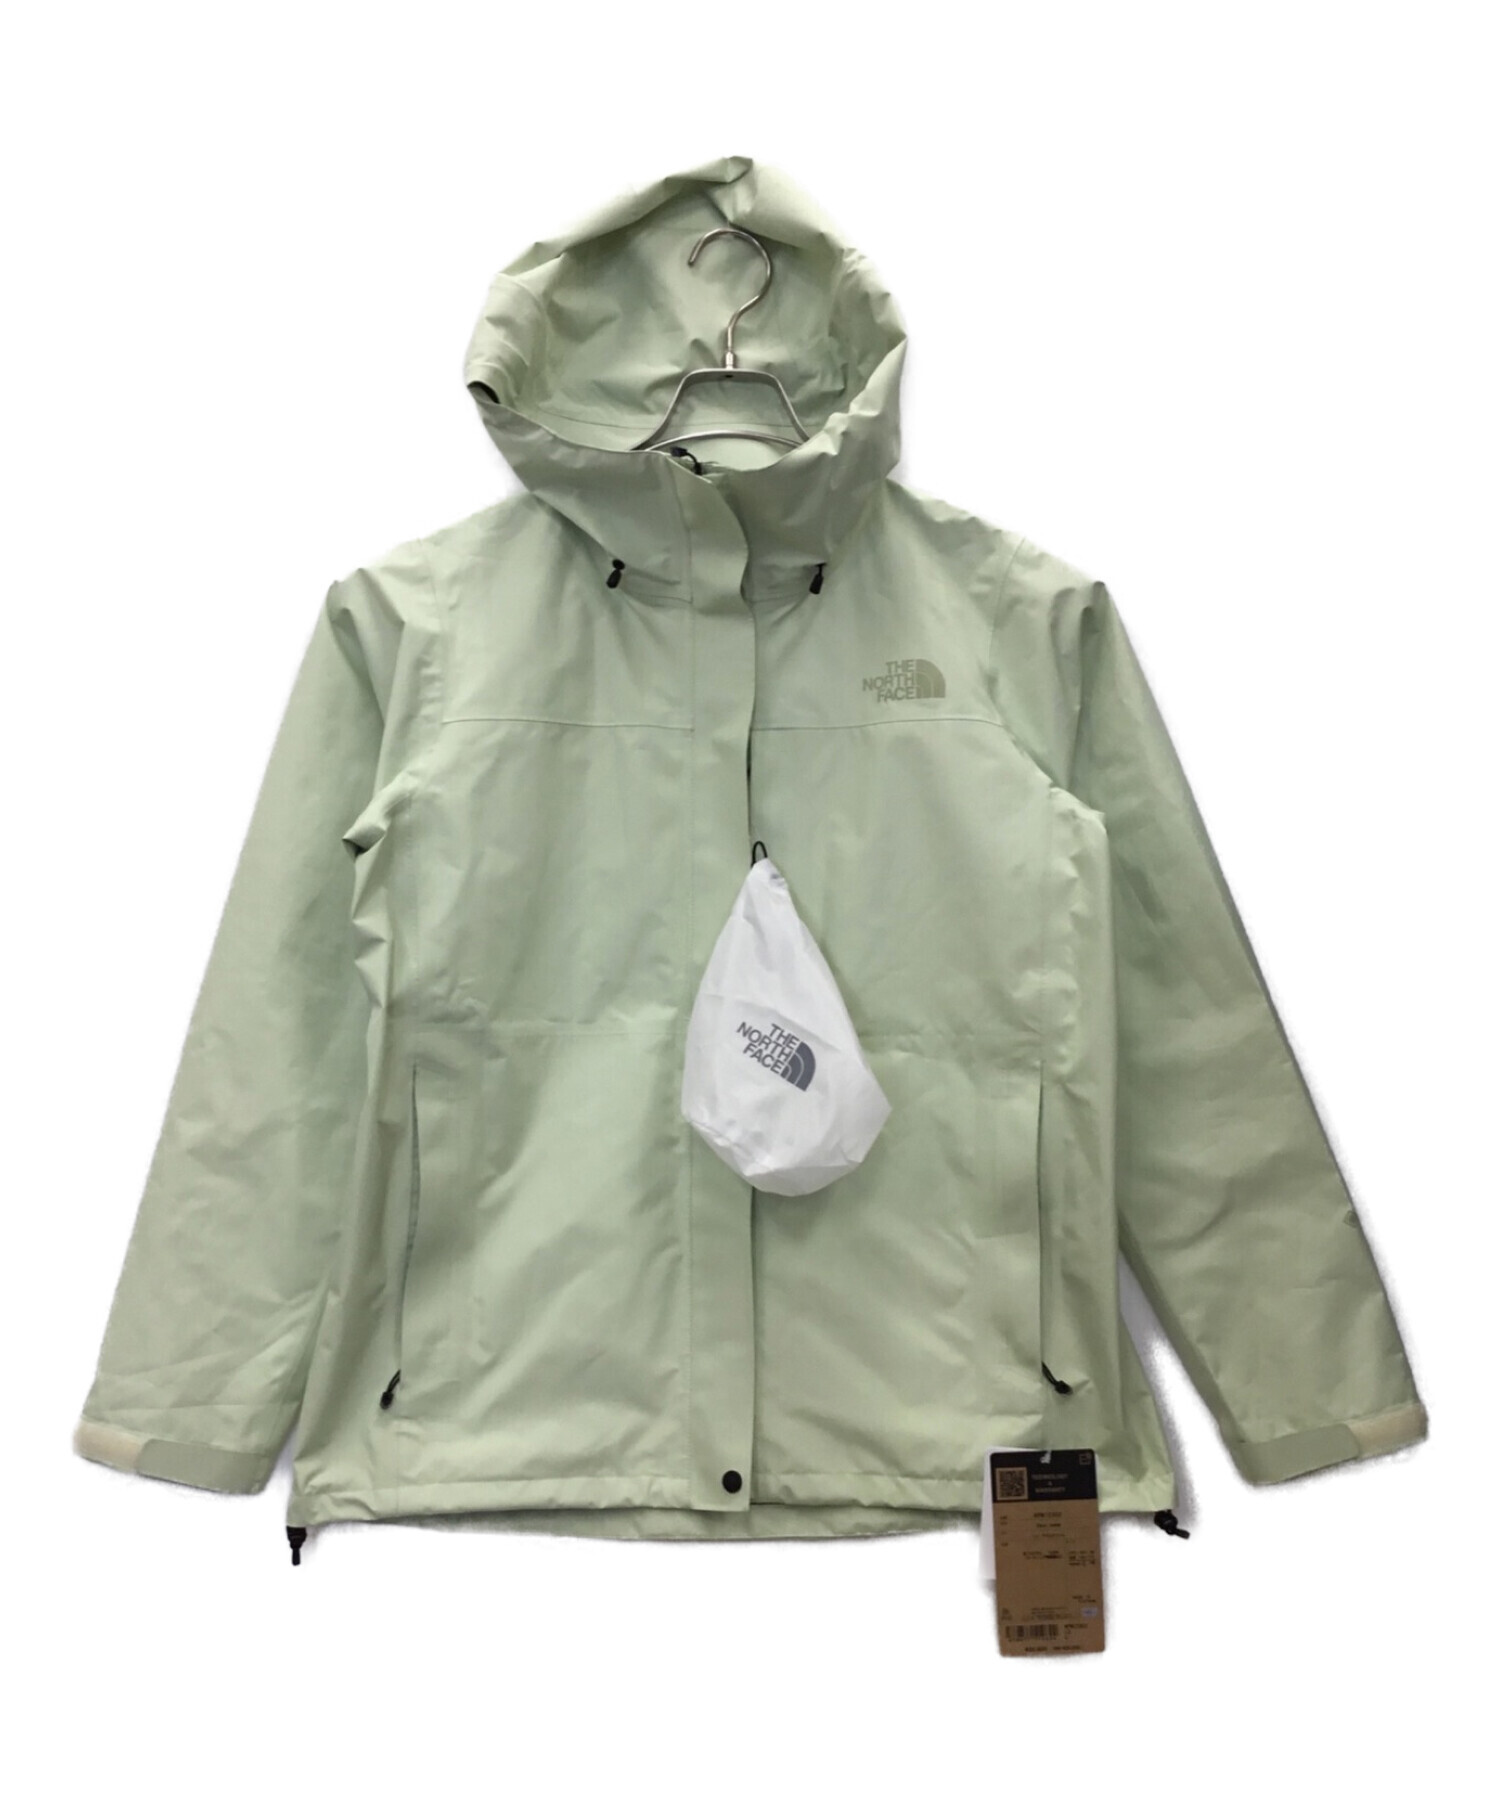 THE NORTH FACE cloud jacket (XXL)